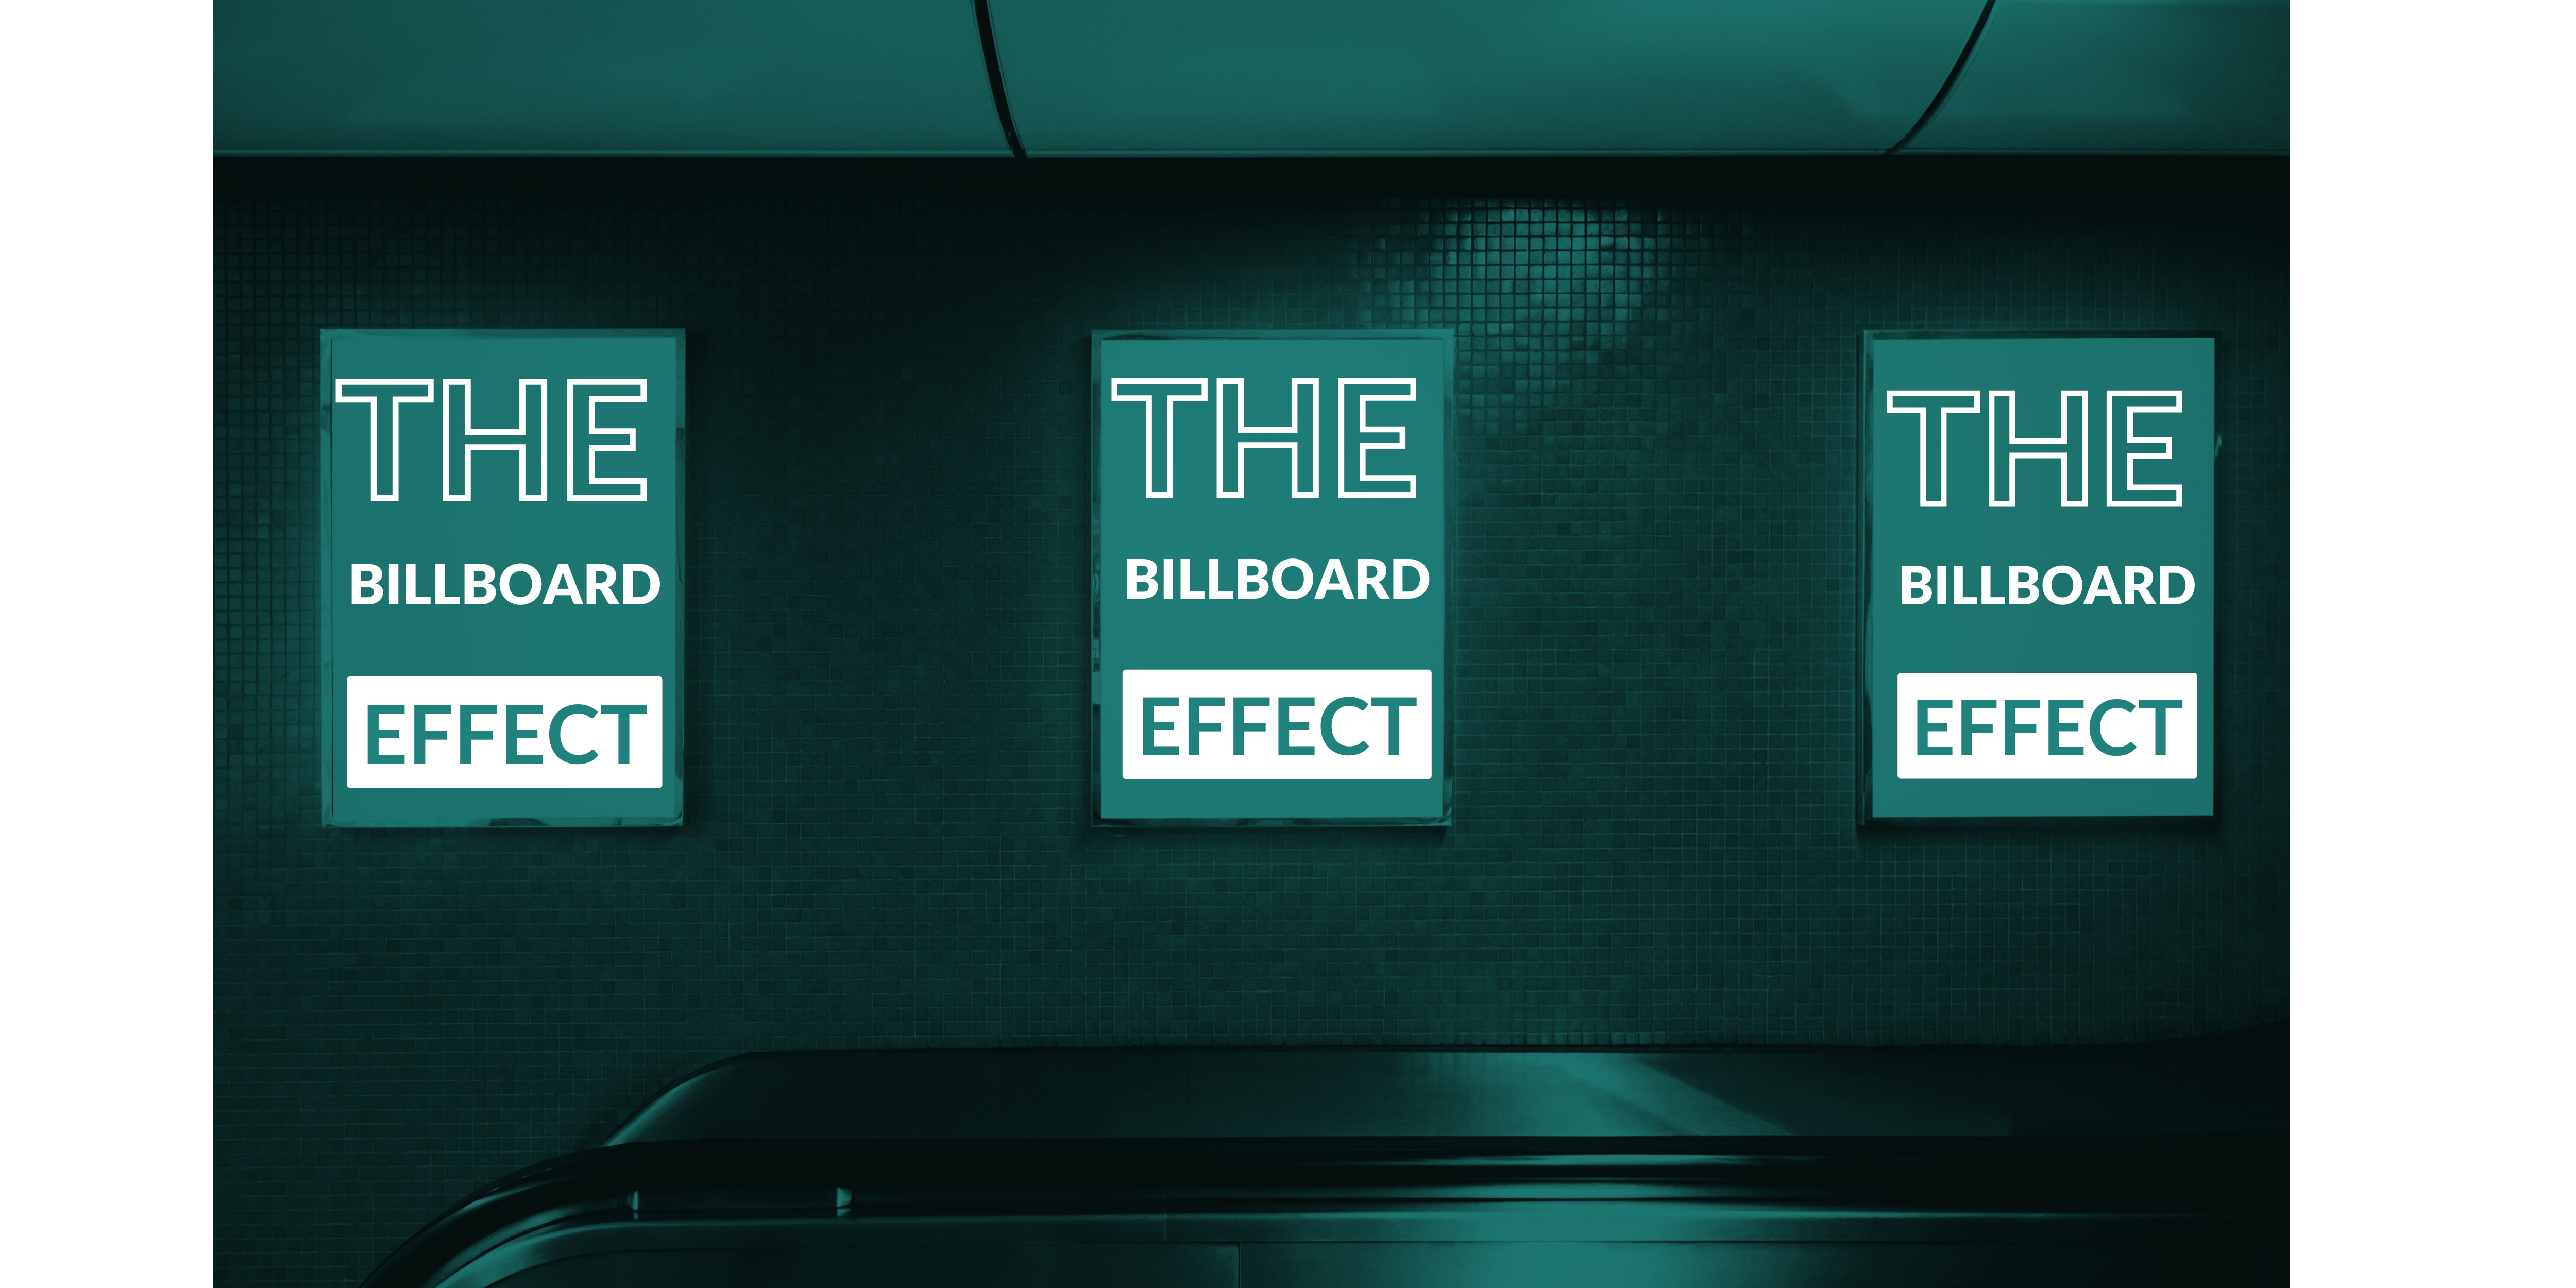 Green macro image titled “The Billboard Effect” | How to Use the Billboard Effect to Increase Hotel Direct Bookings